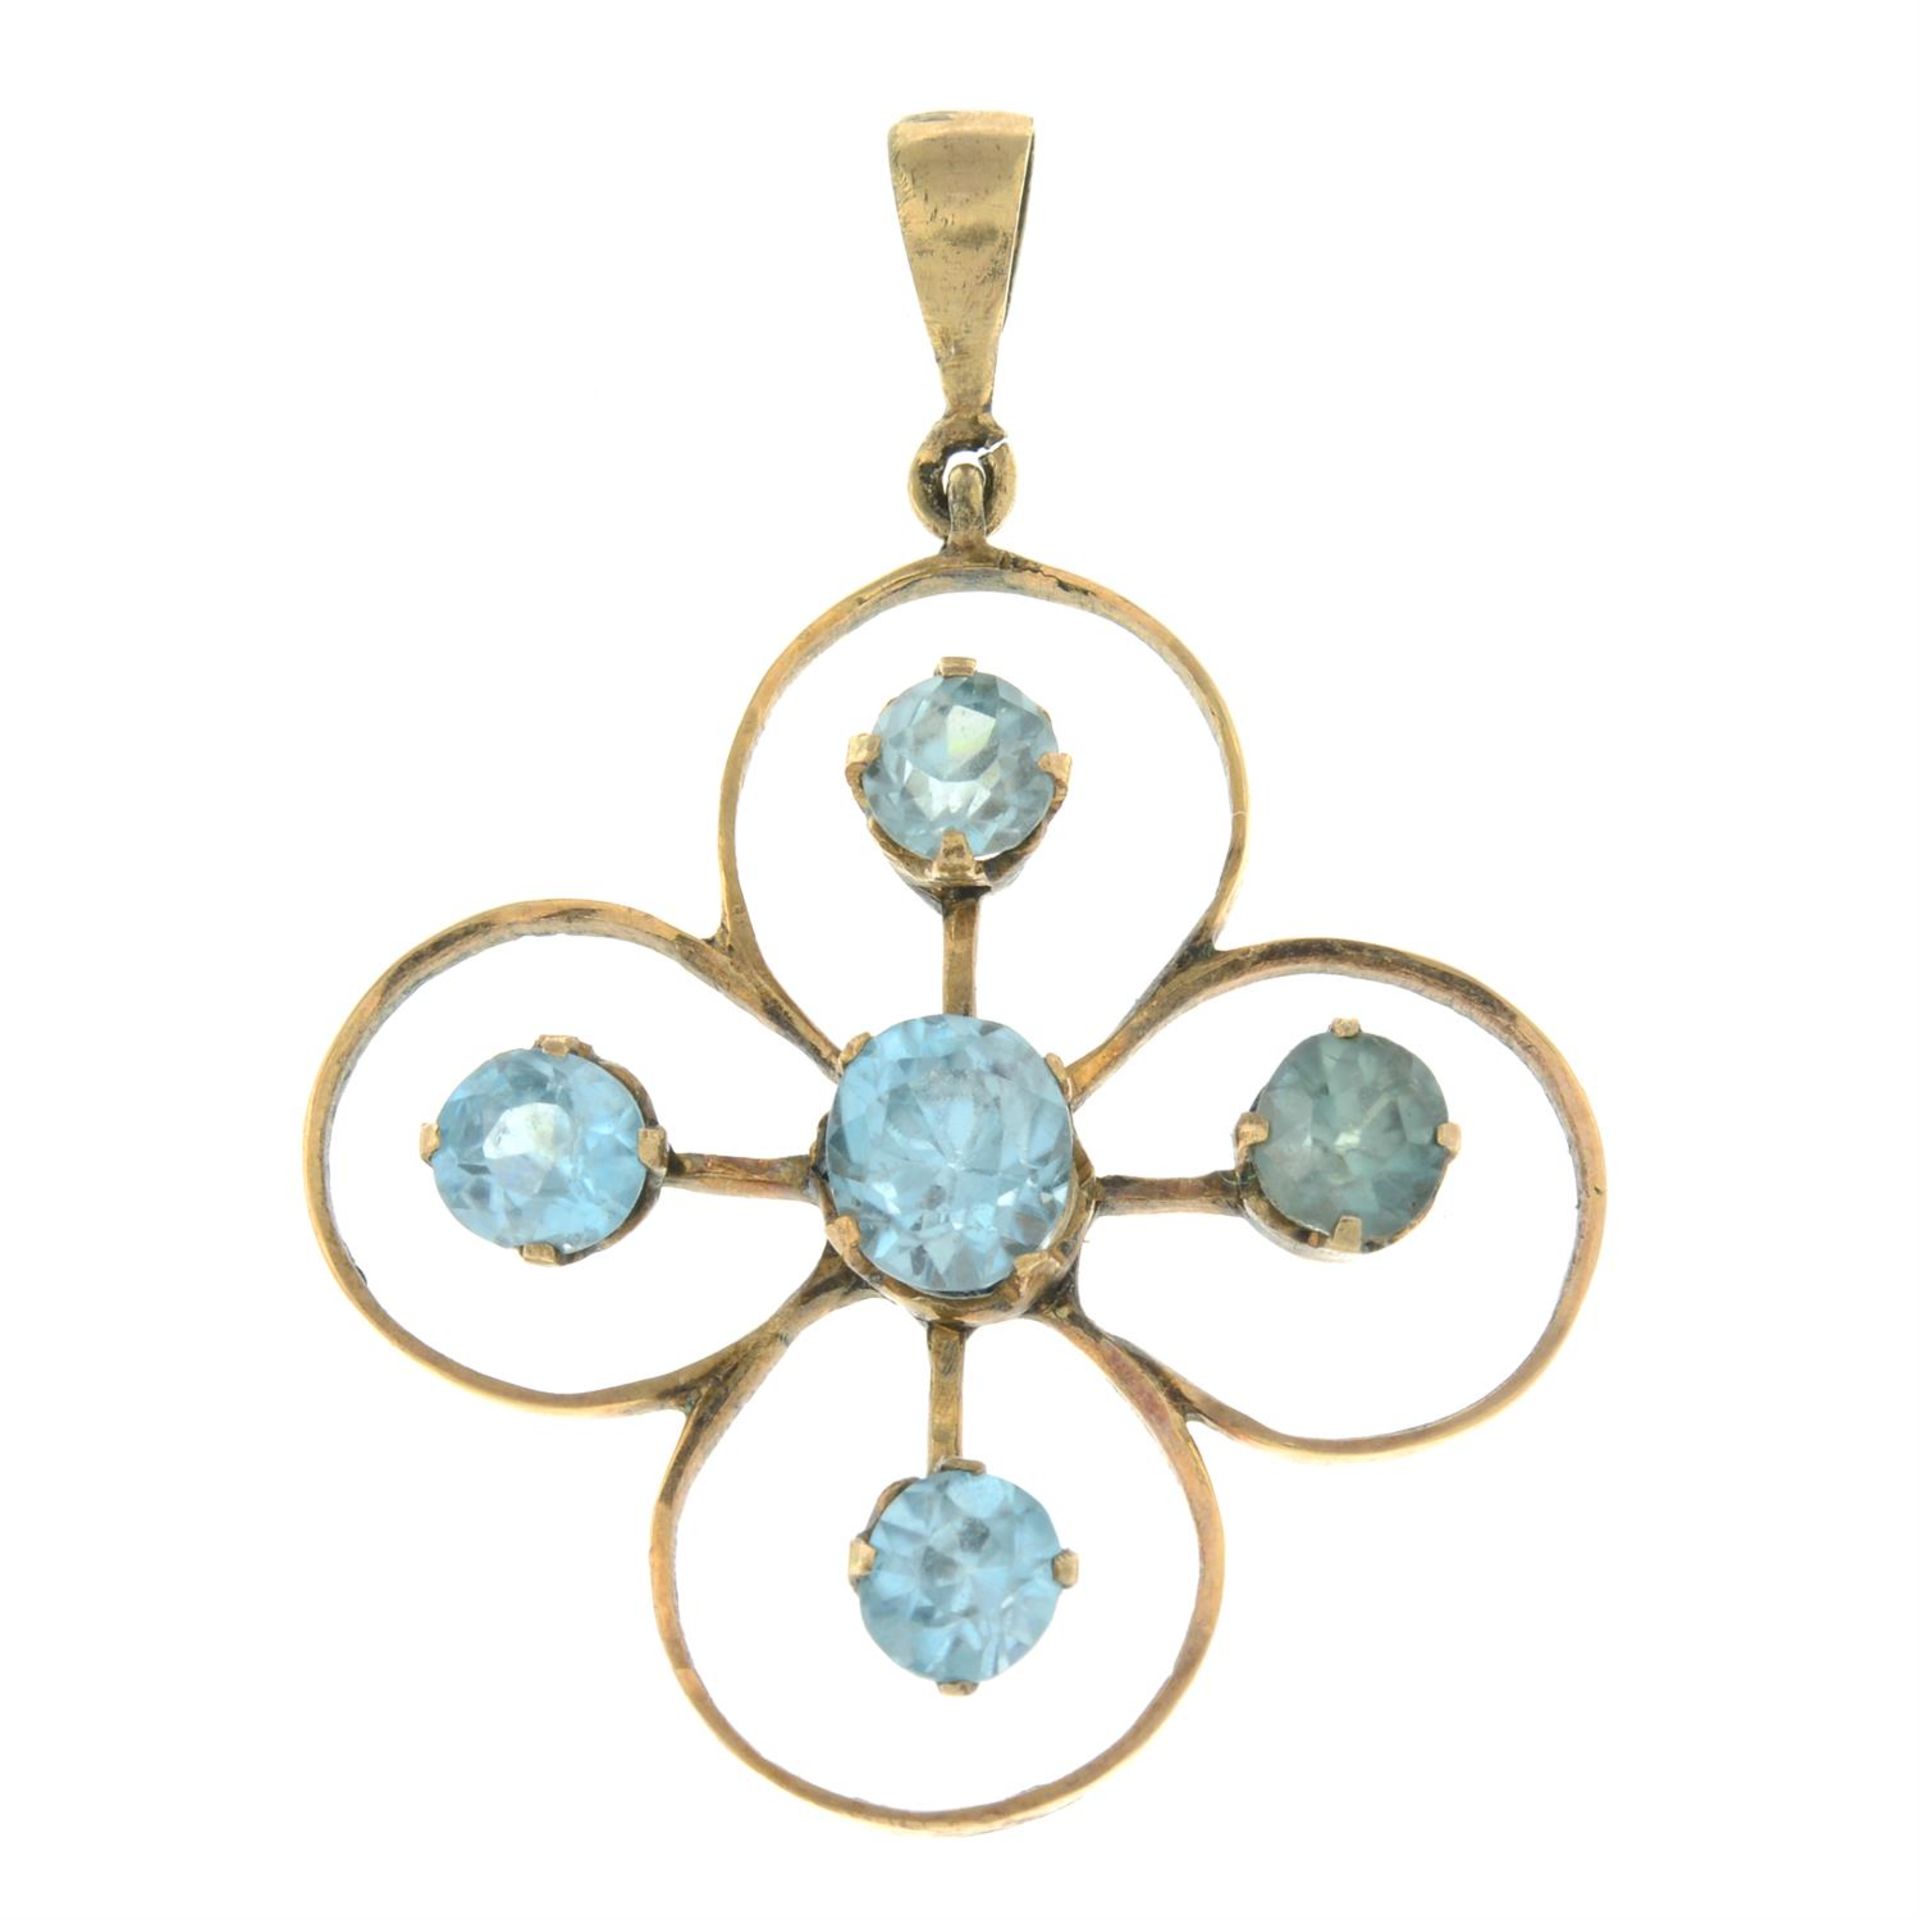 An early 20th century gold blue zircon floral openwork pendant.